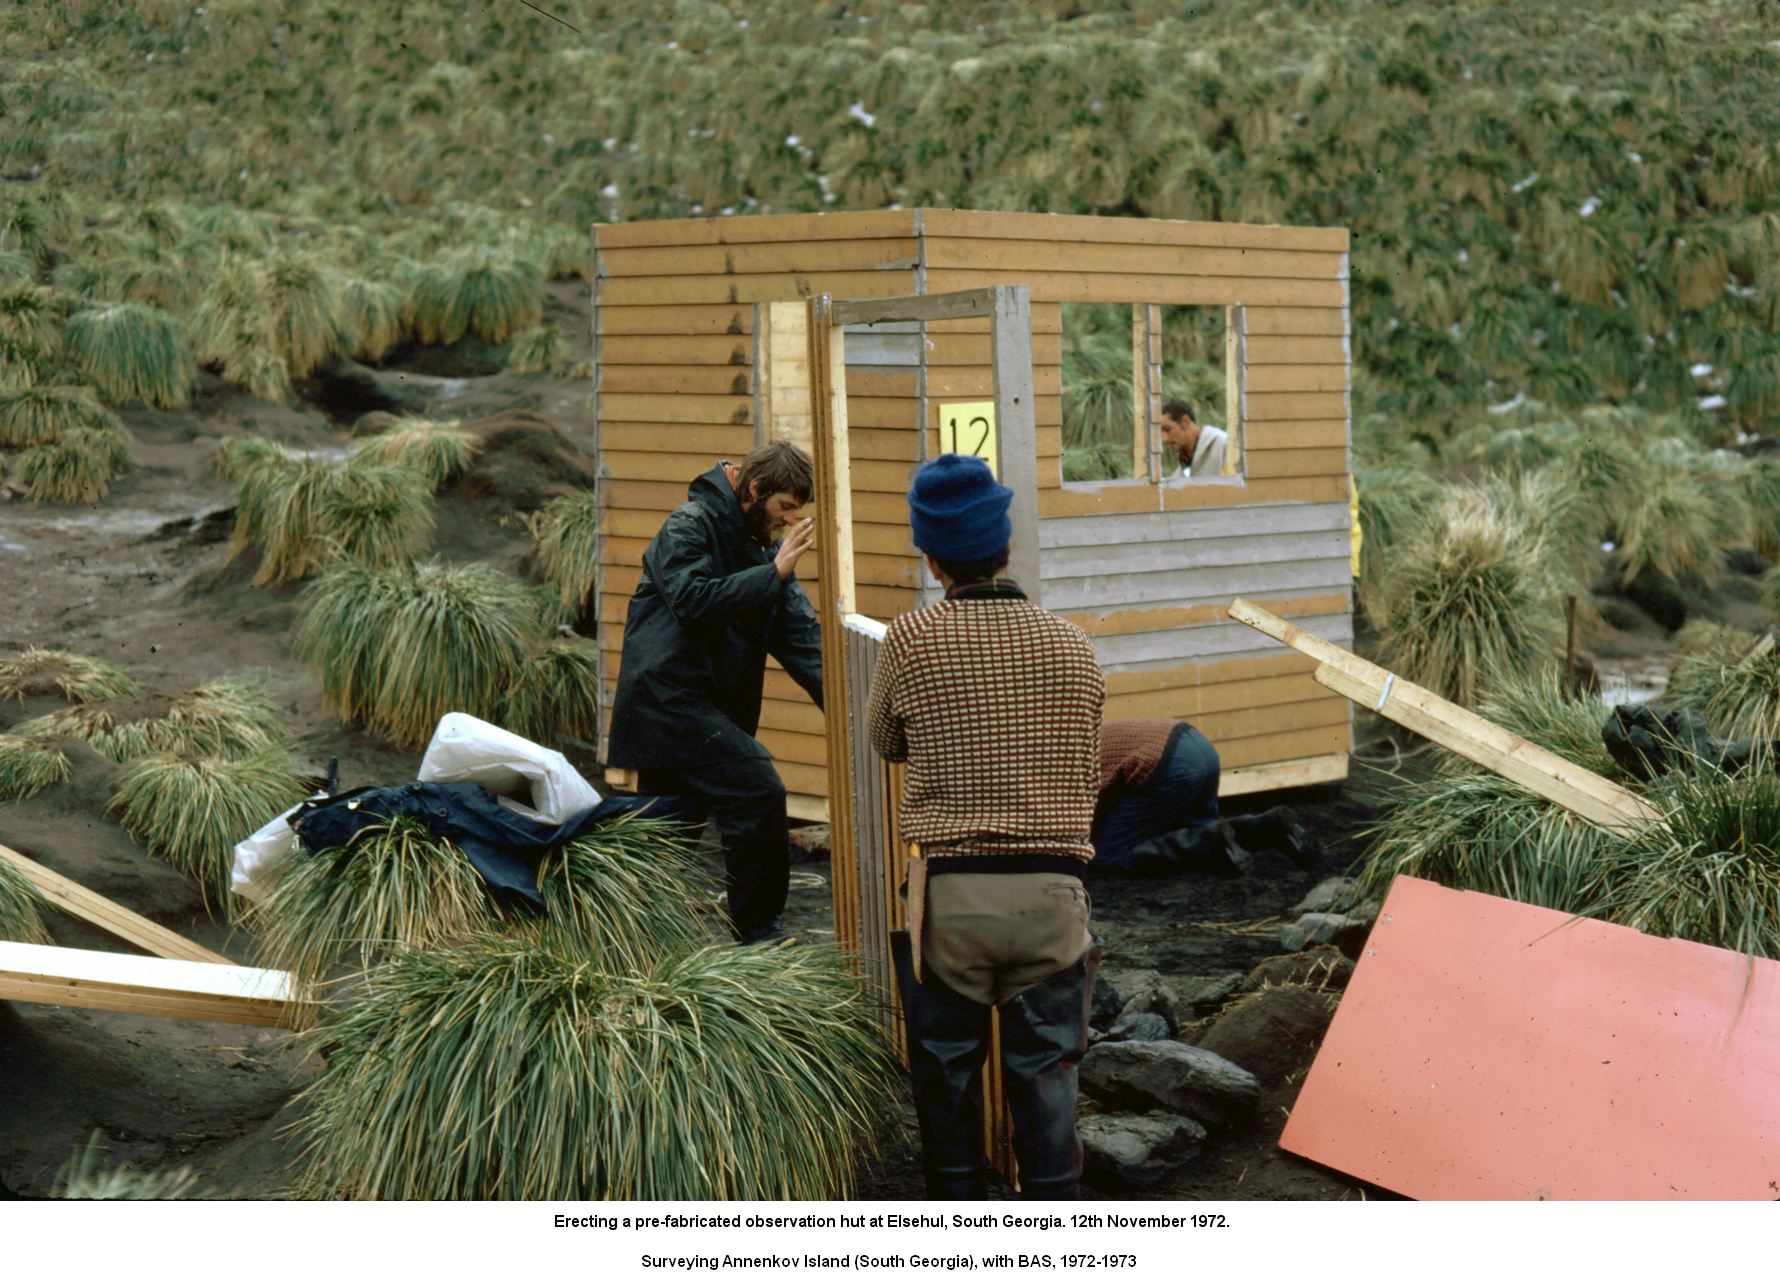 Erecting a pre-fabricated observation hut at Elsehul, South Georgia. 12th November 1972.